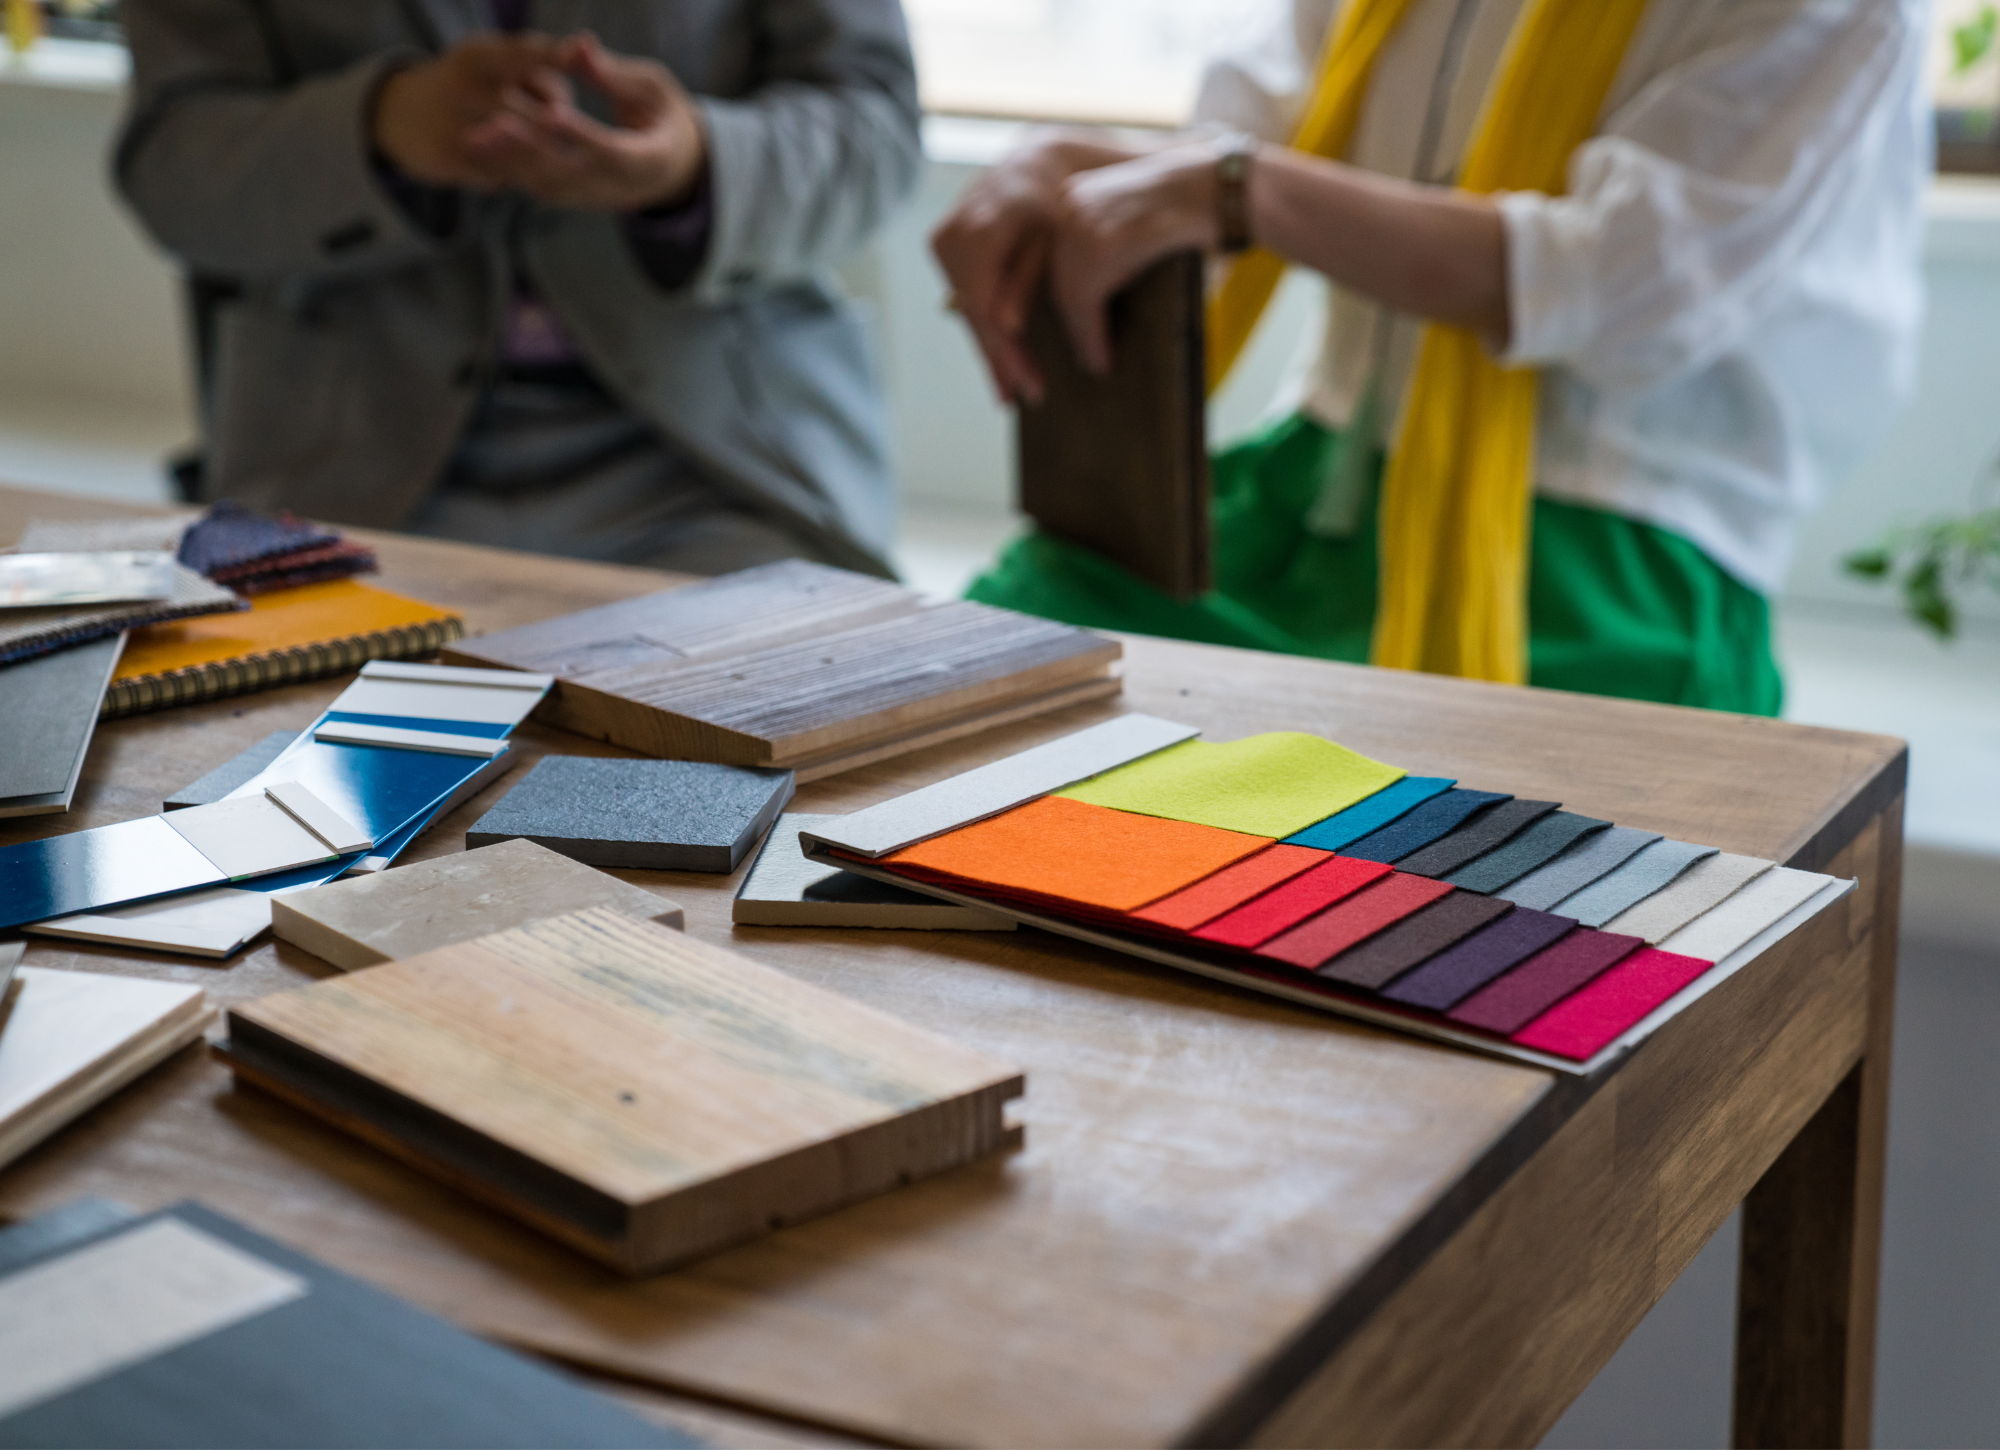 How Texture, Materials and Colours Affect the Work Environment